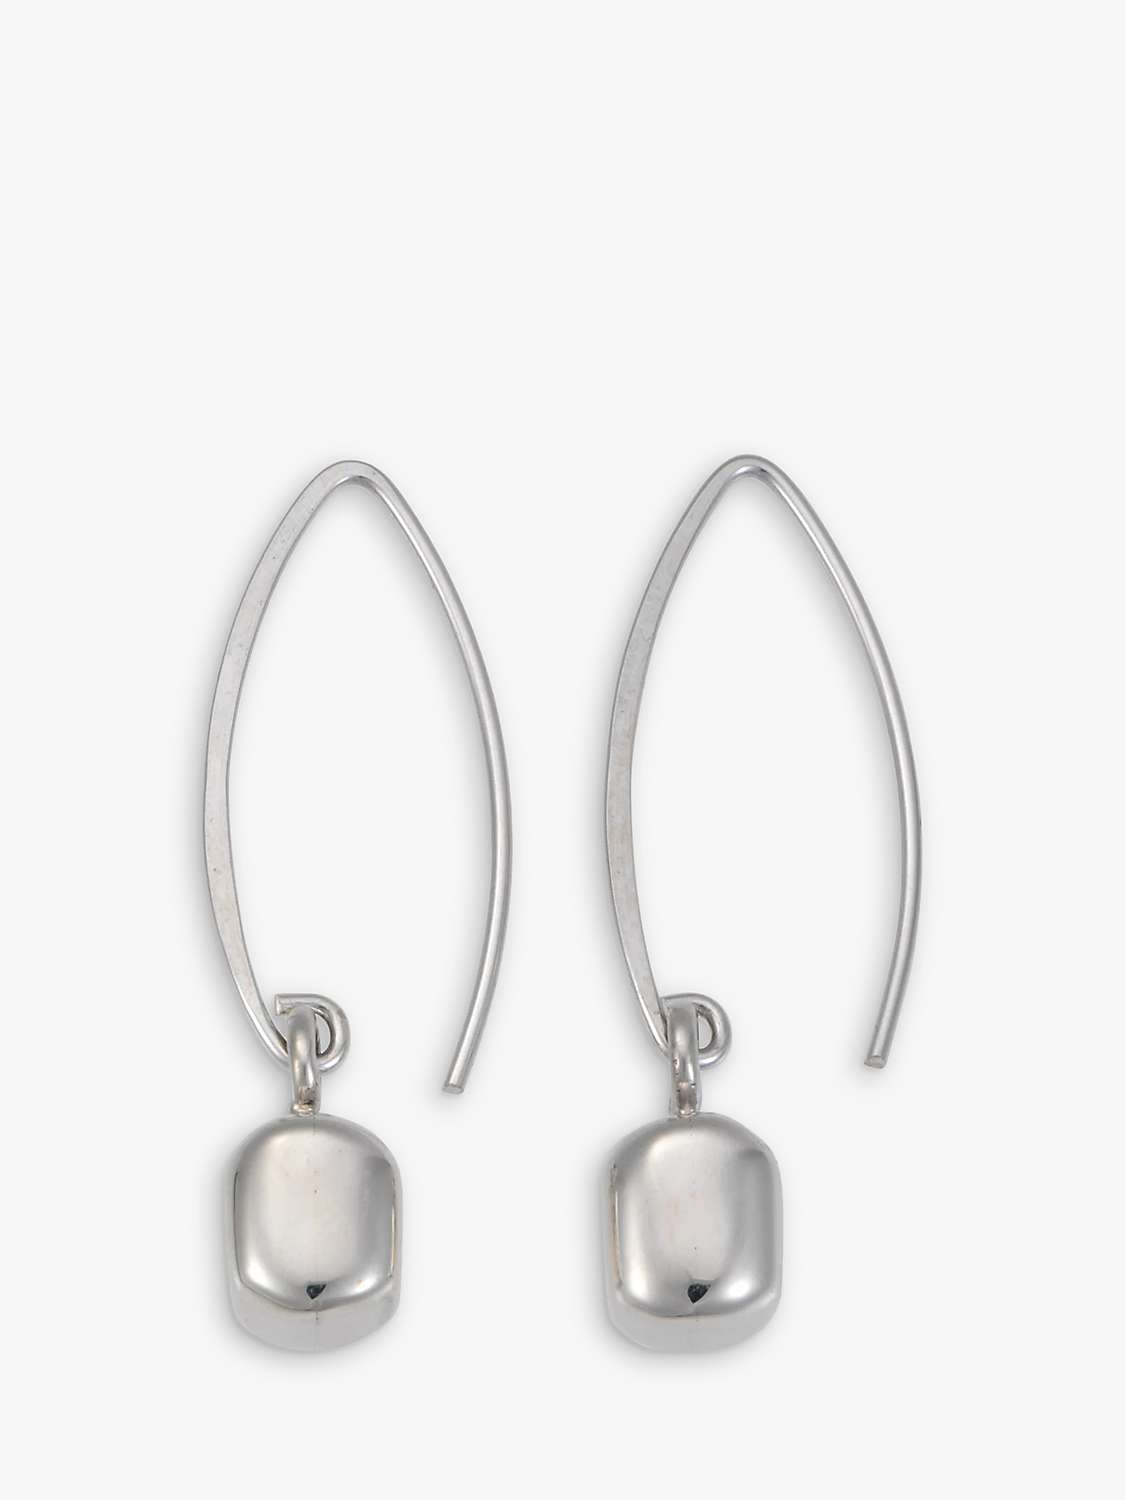 Buy Andea Silver Cube Wire Drop Earrings Online at johnlewis.com